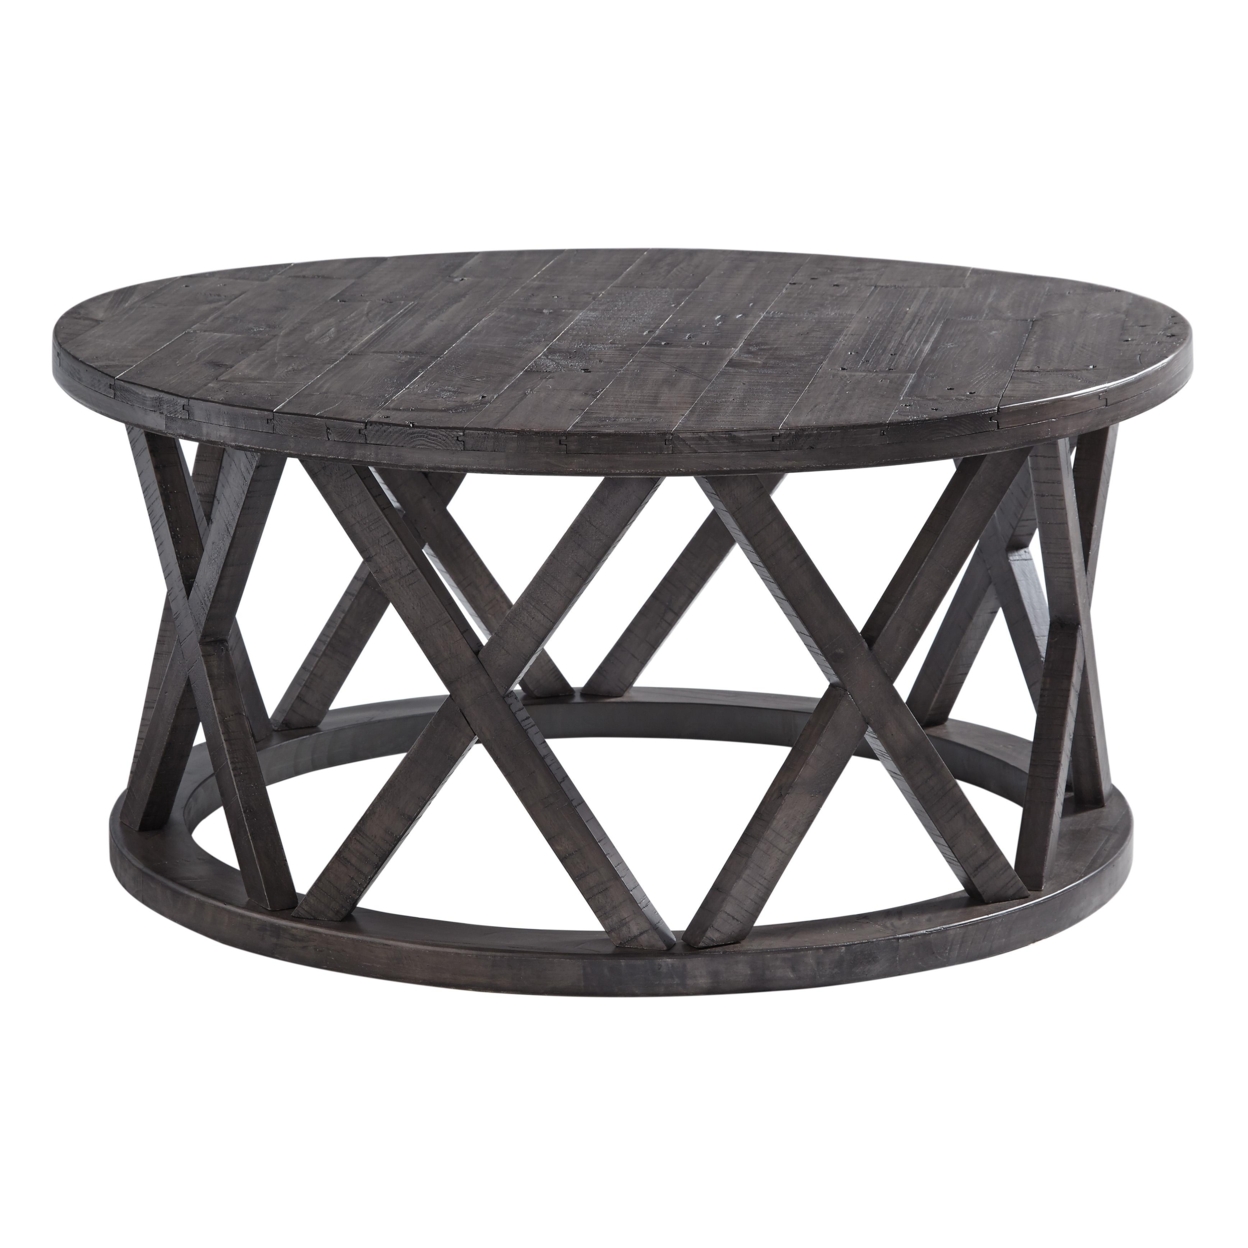 Plank Style Round Wooden Frame Cocktail Table With Lattice Cut Out, Gray- Saltoro Sherpi